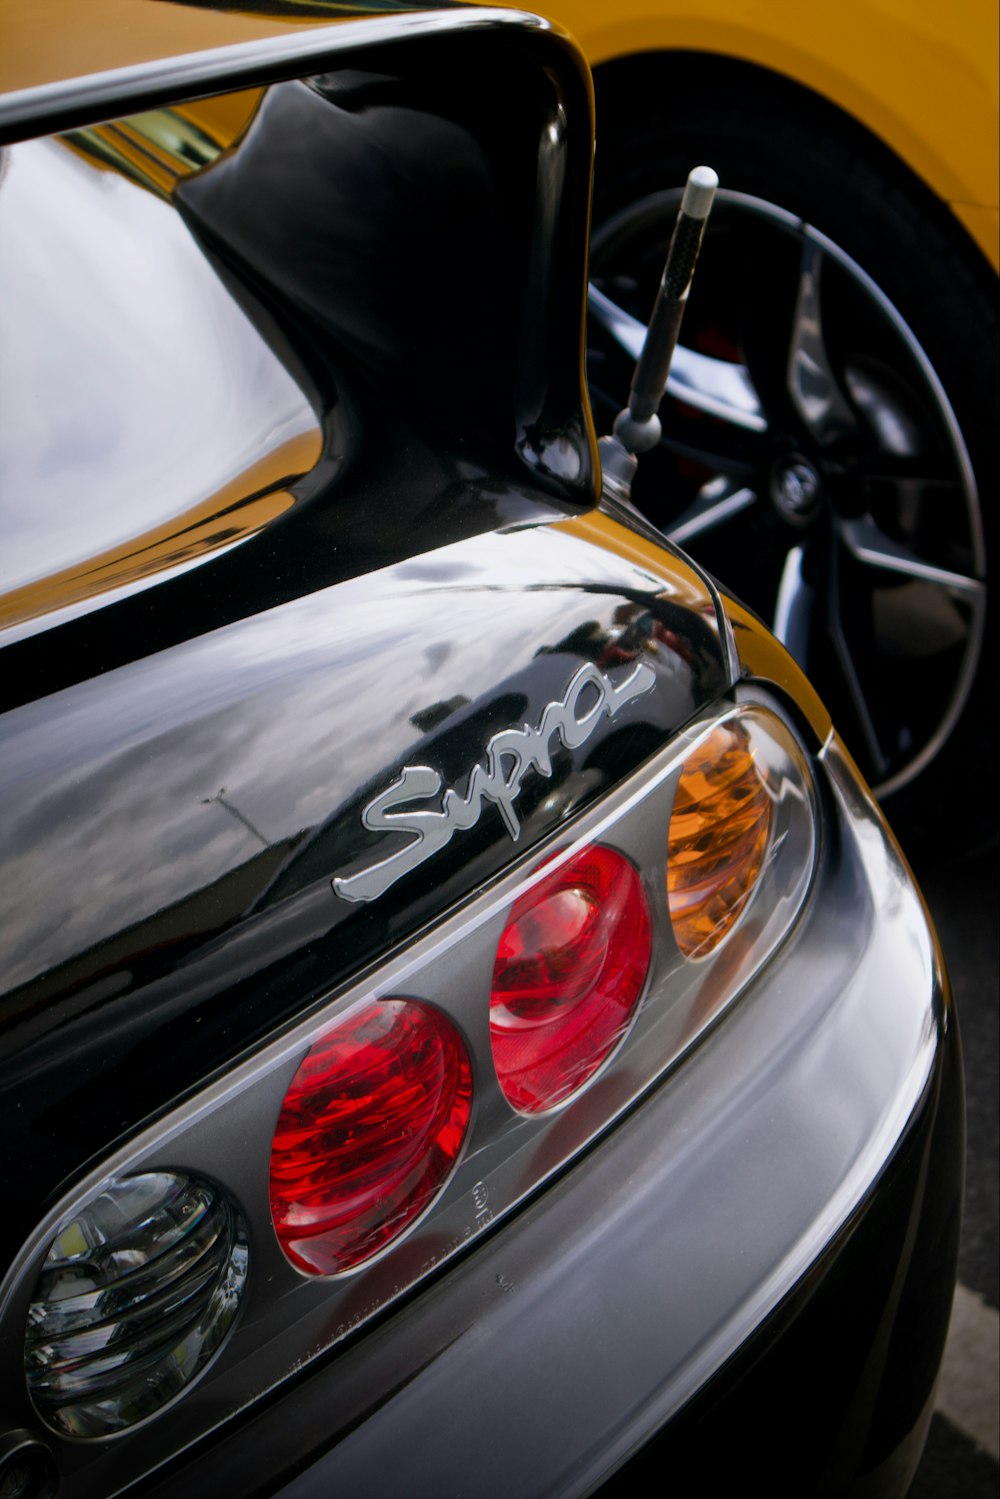 a close up of a sports car's tail lights